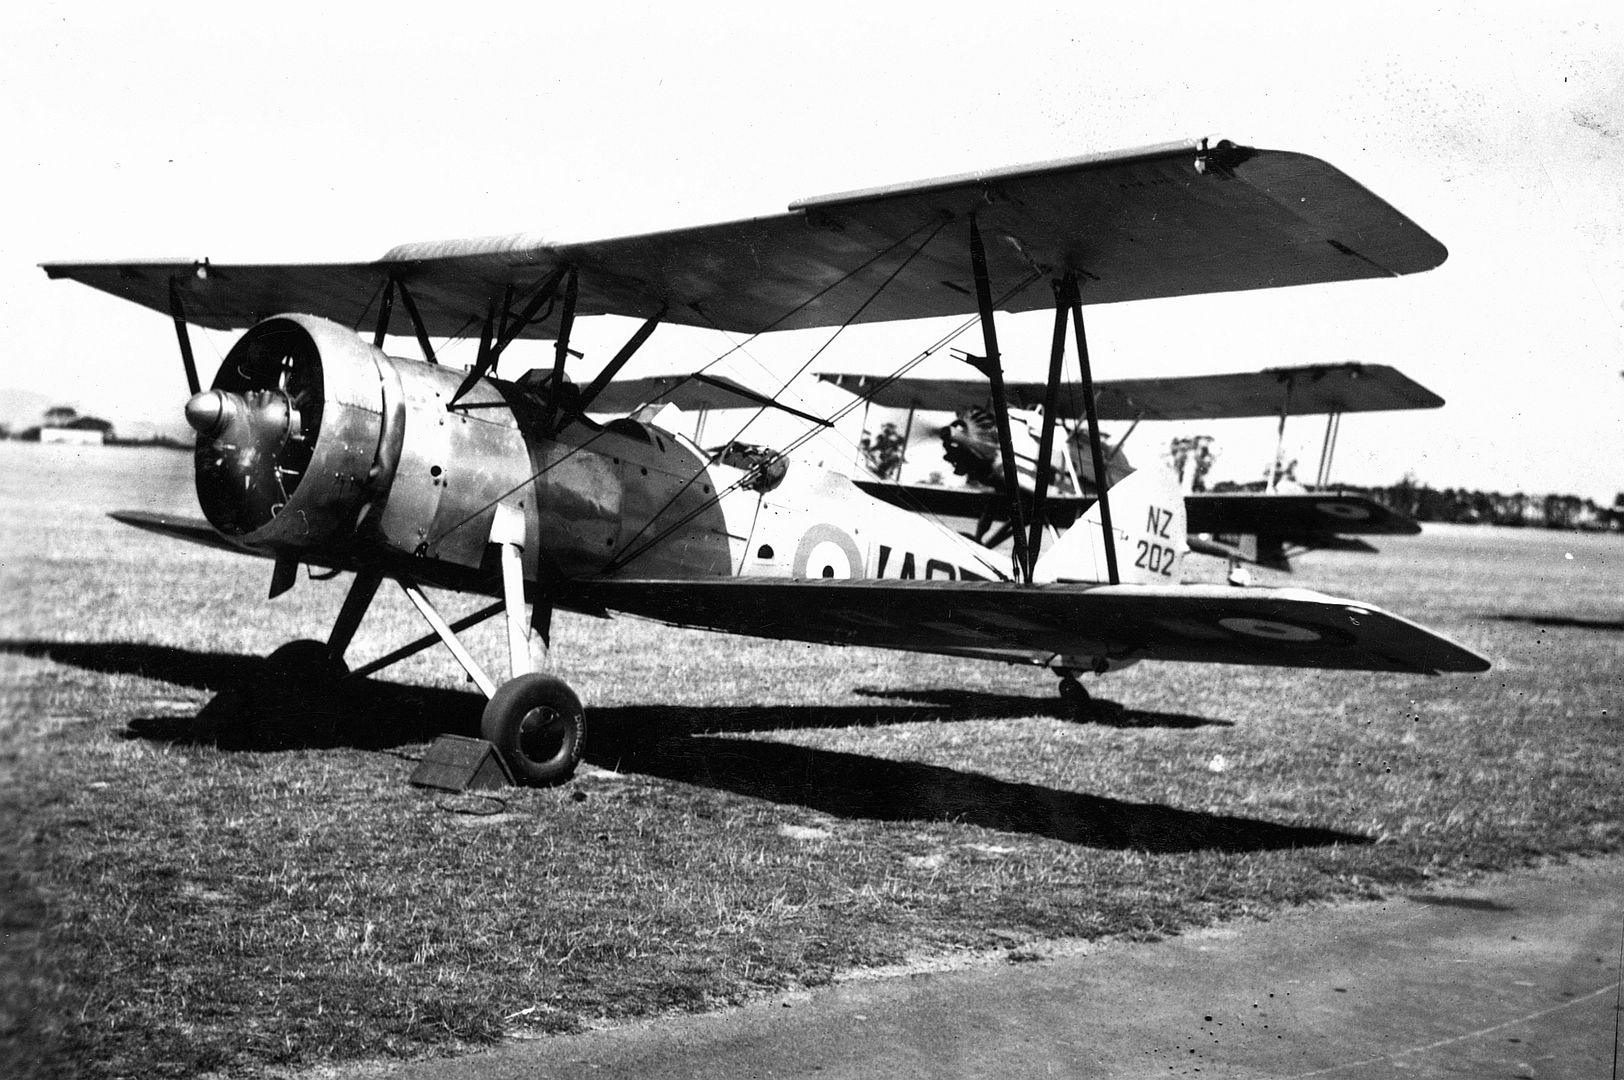 Avro 626 NZ202 With Its Engine Running